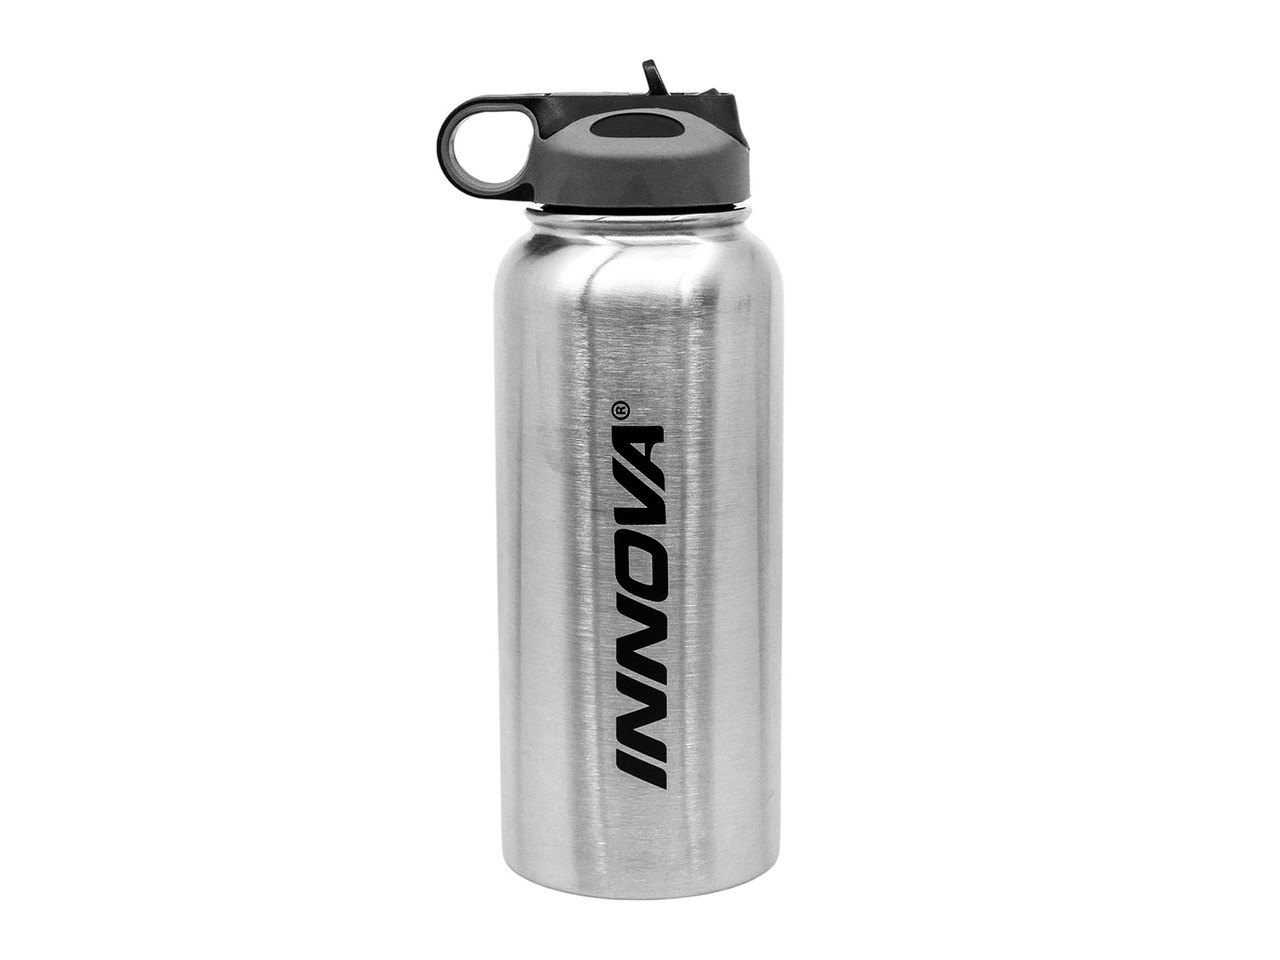 Avon 14 Silver and Black Beverage Thermos Canteen